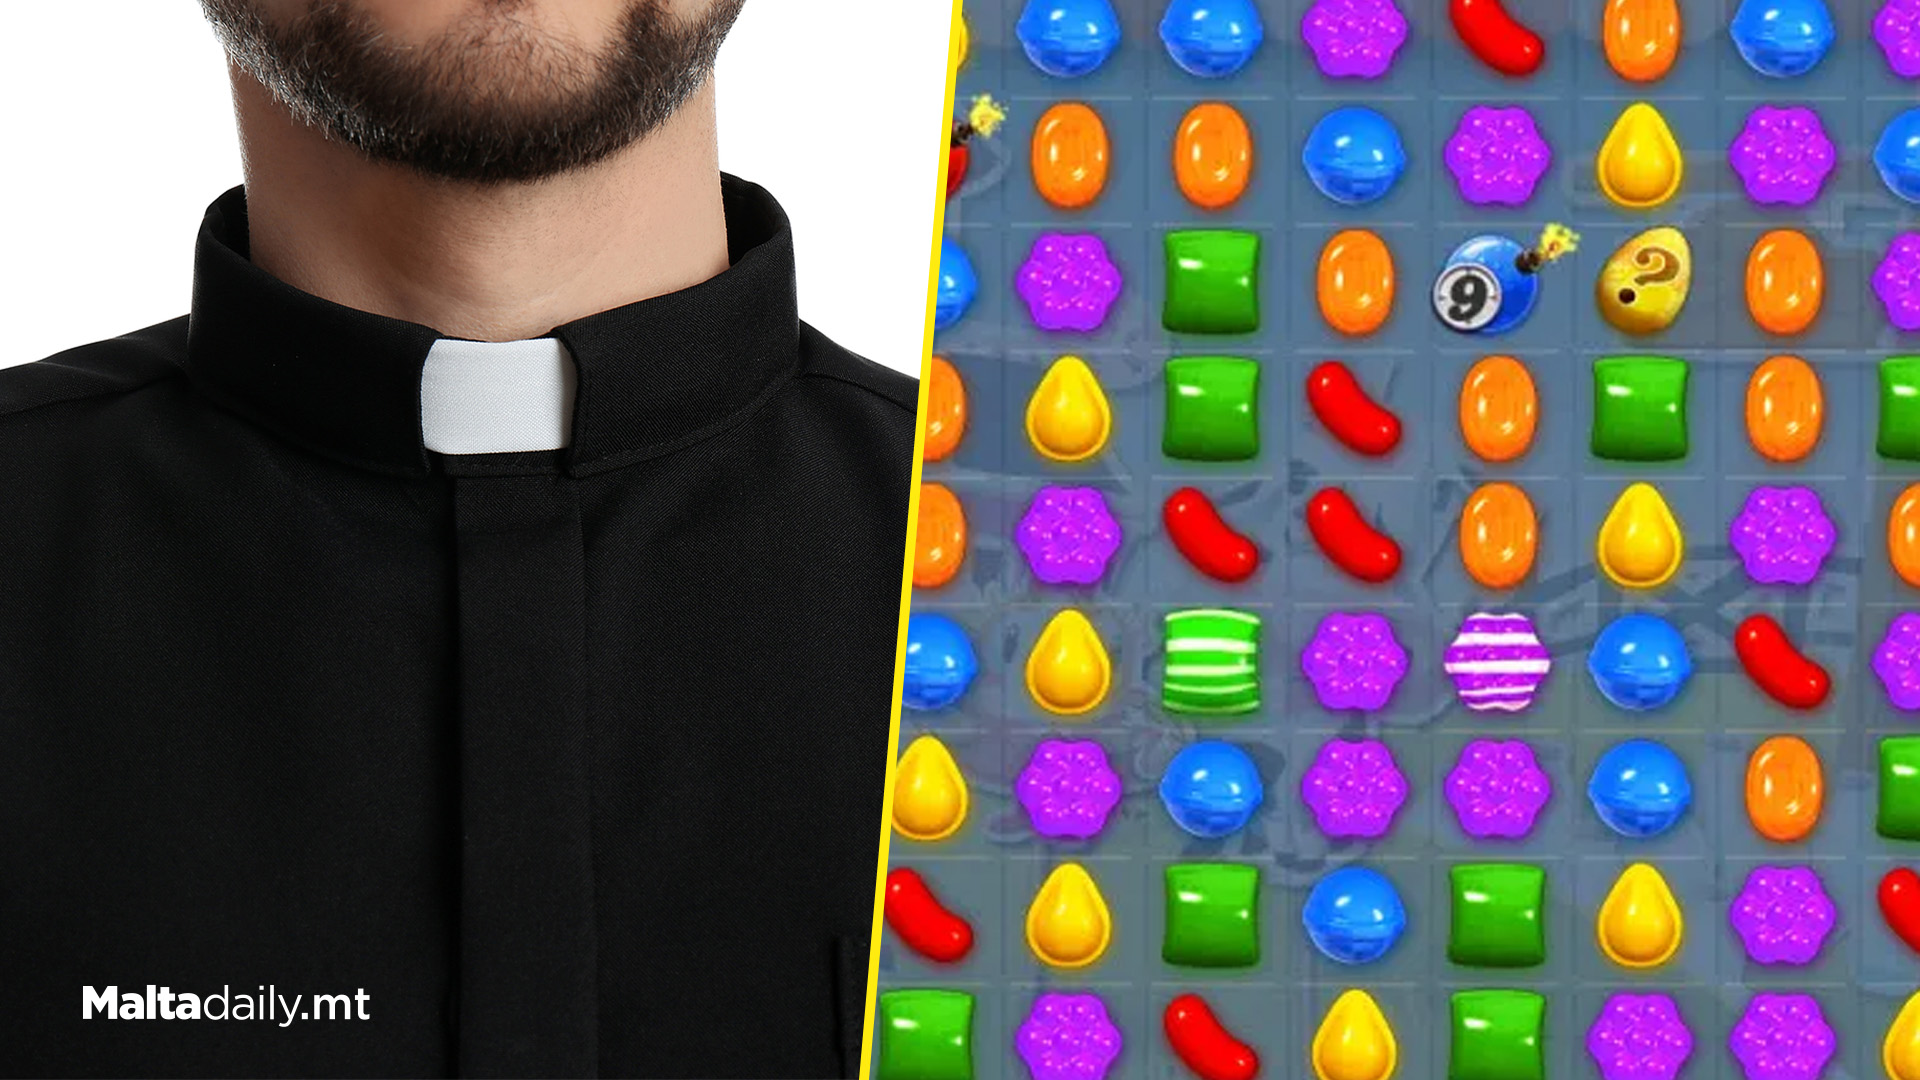 Priest Spends $40K Of Church Funds On Candy Crush